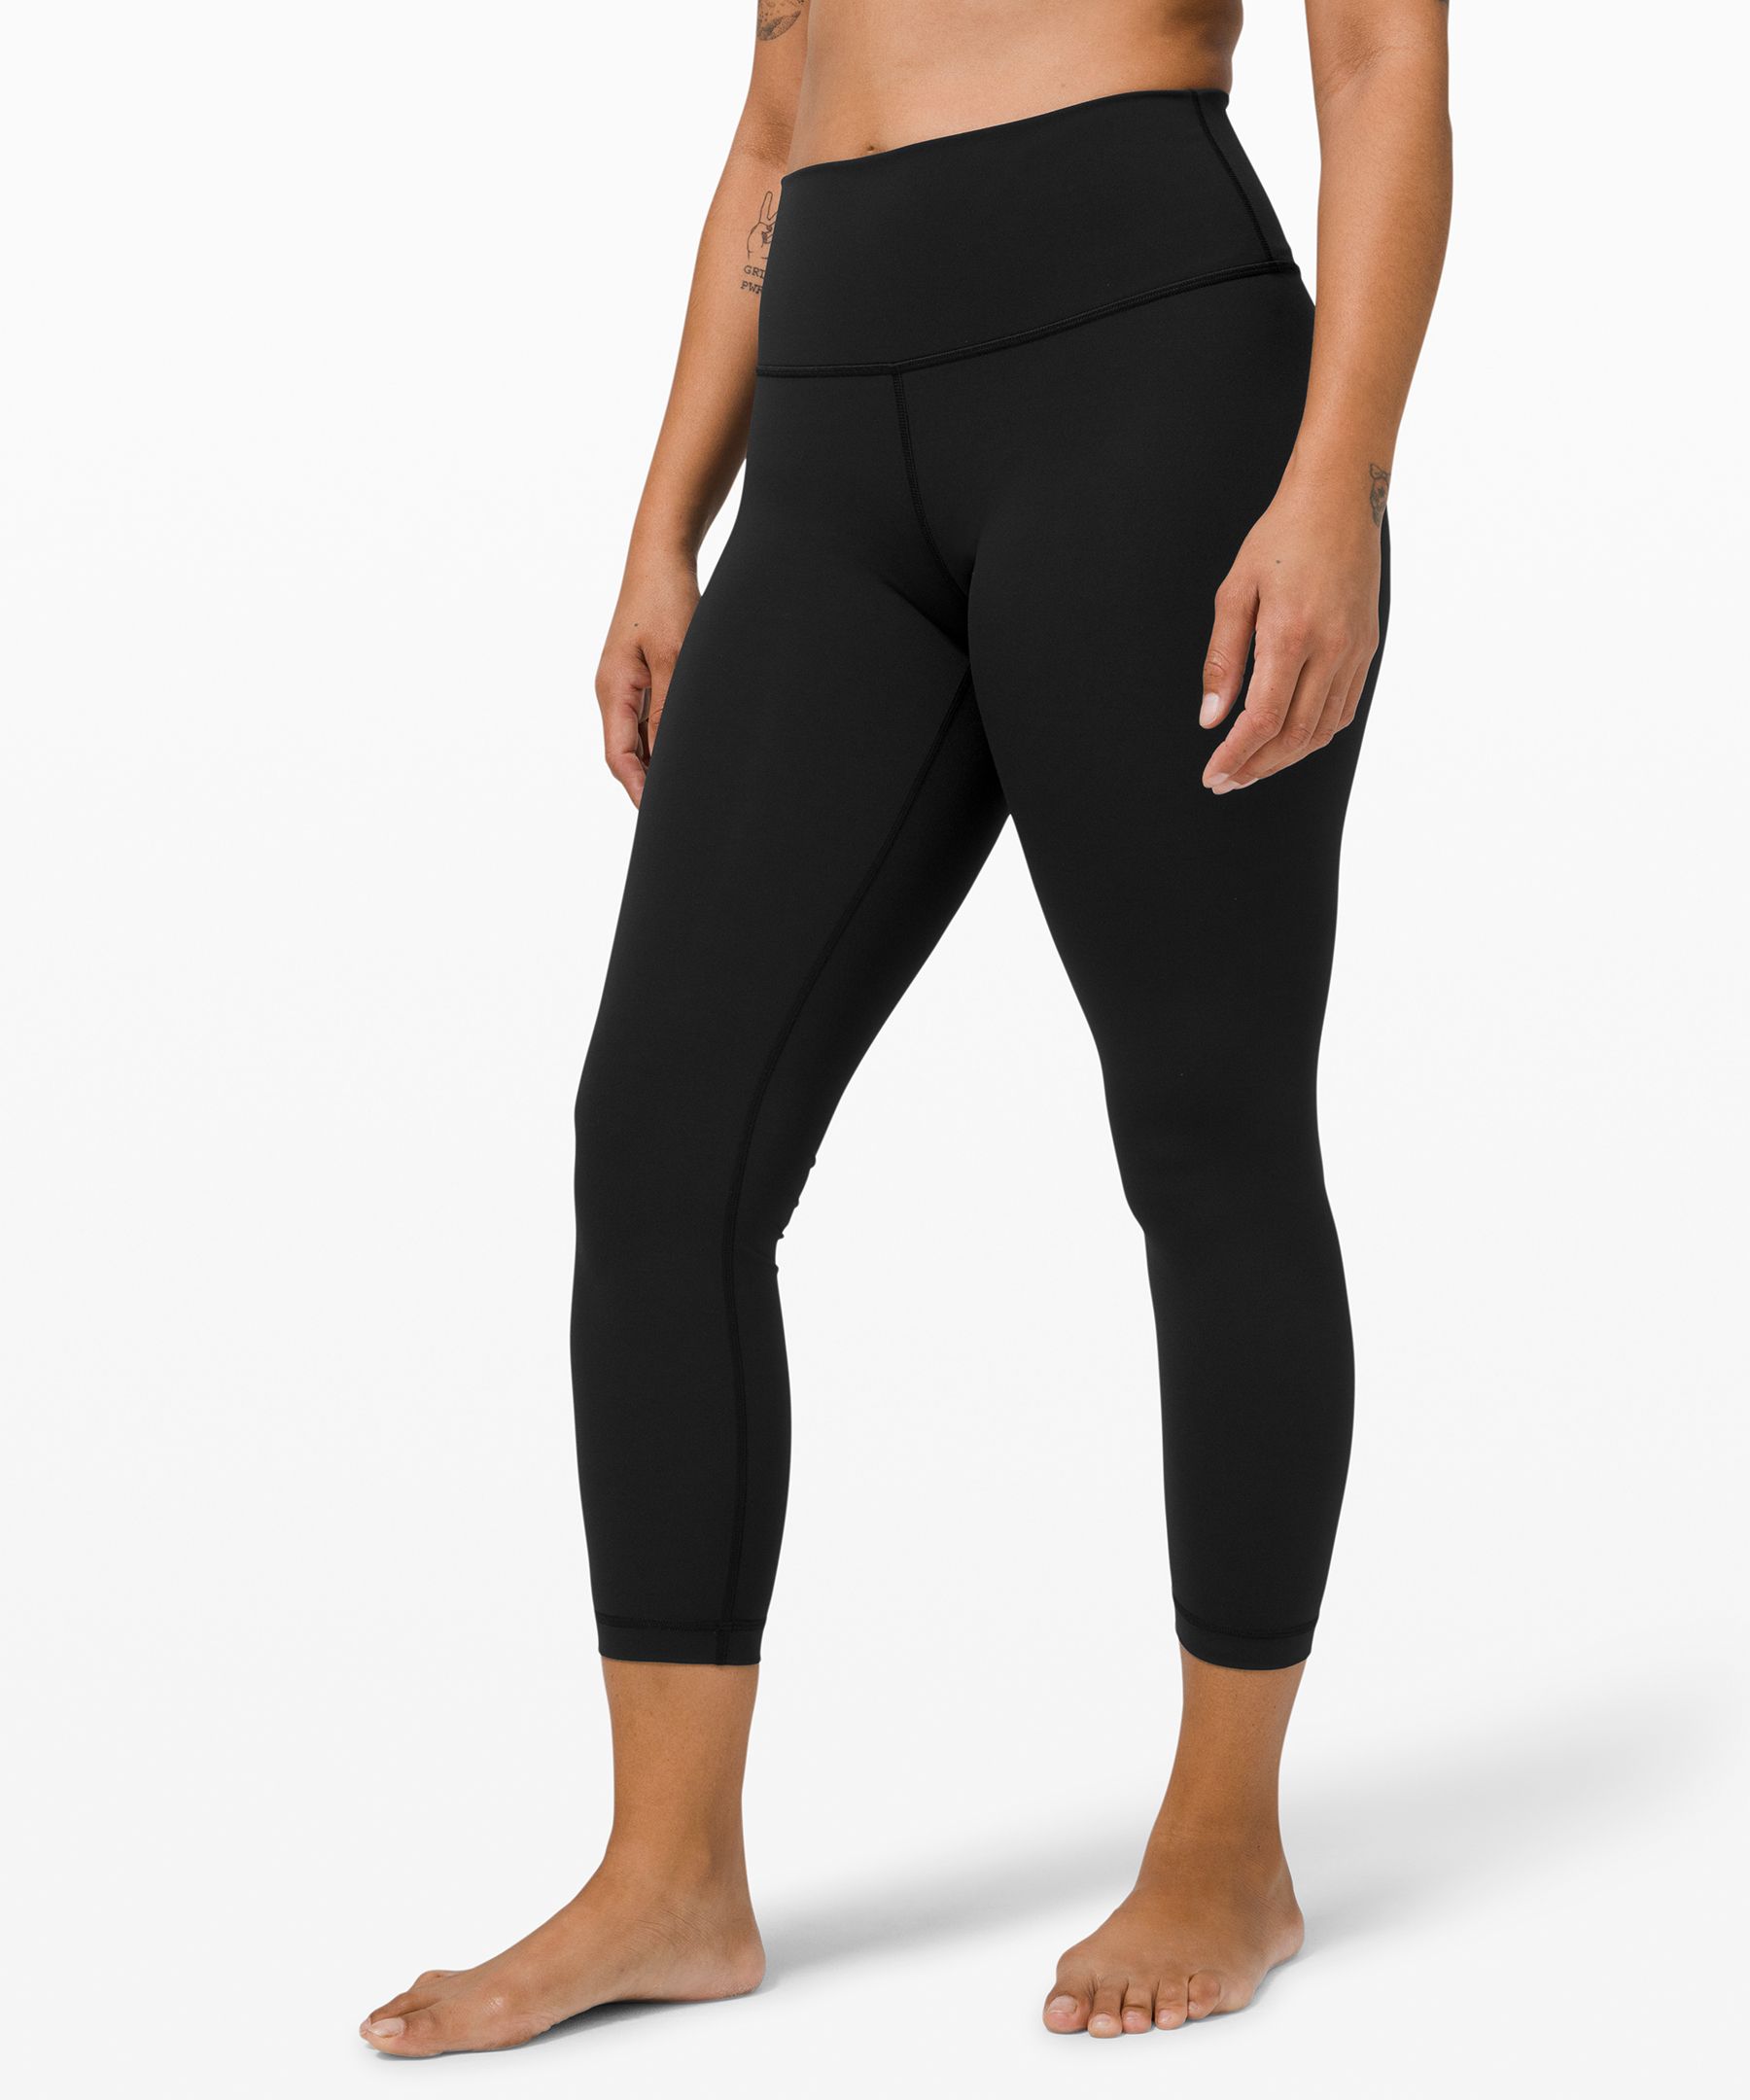 Lululemon Wunder Under High-rise Tights 25" Full-on Luxtreme In Black